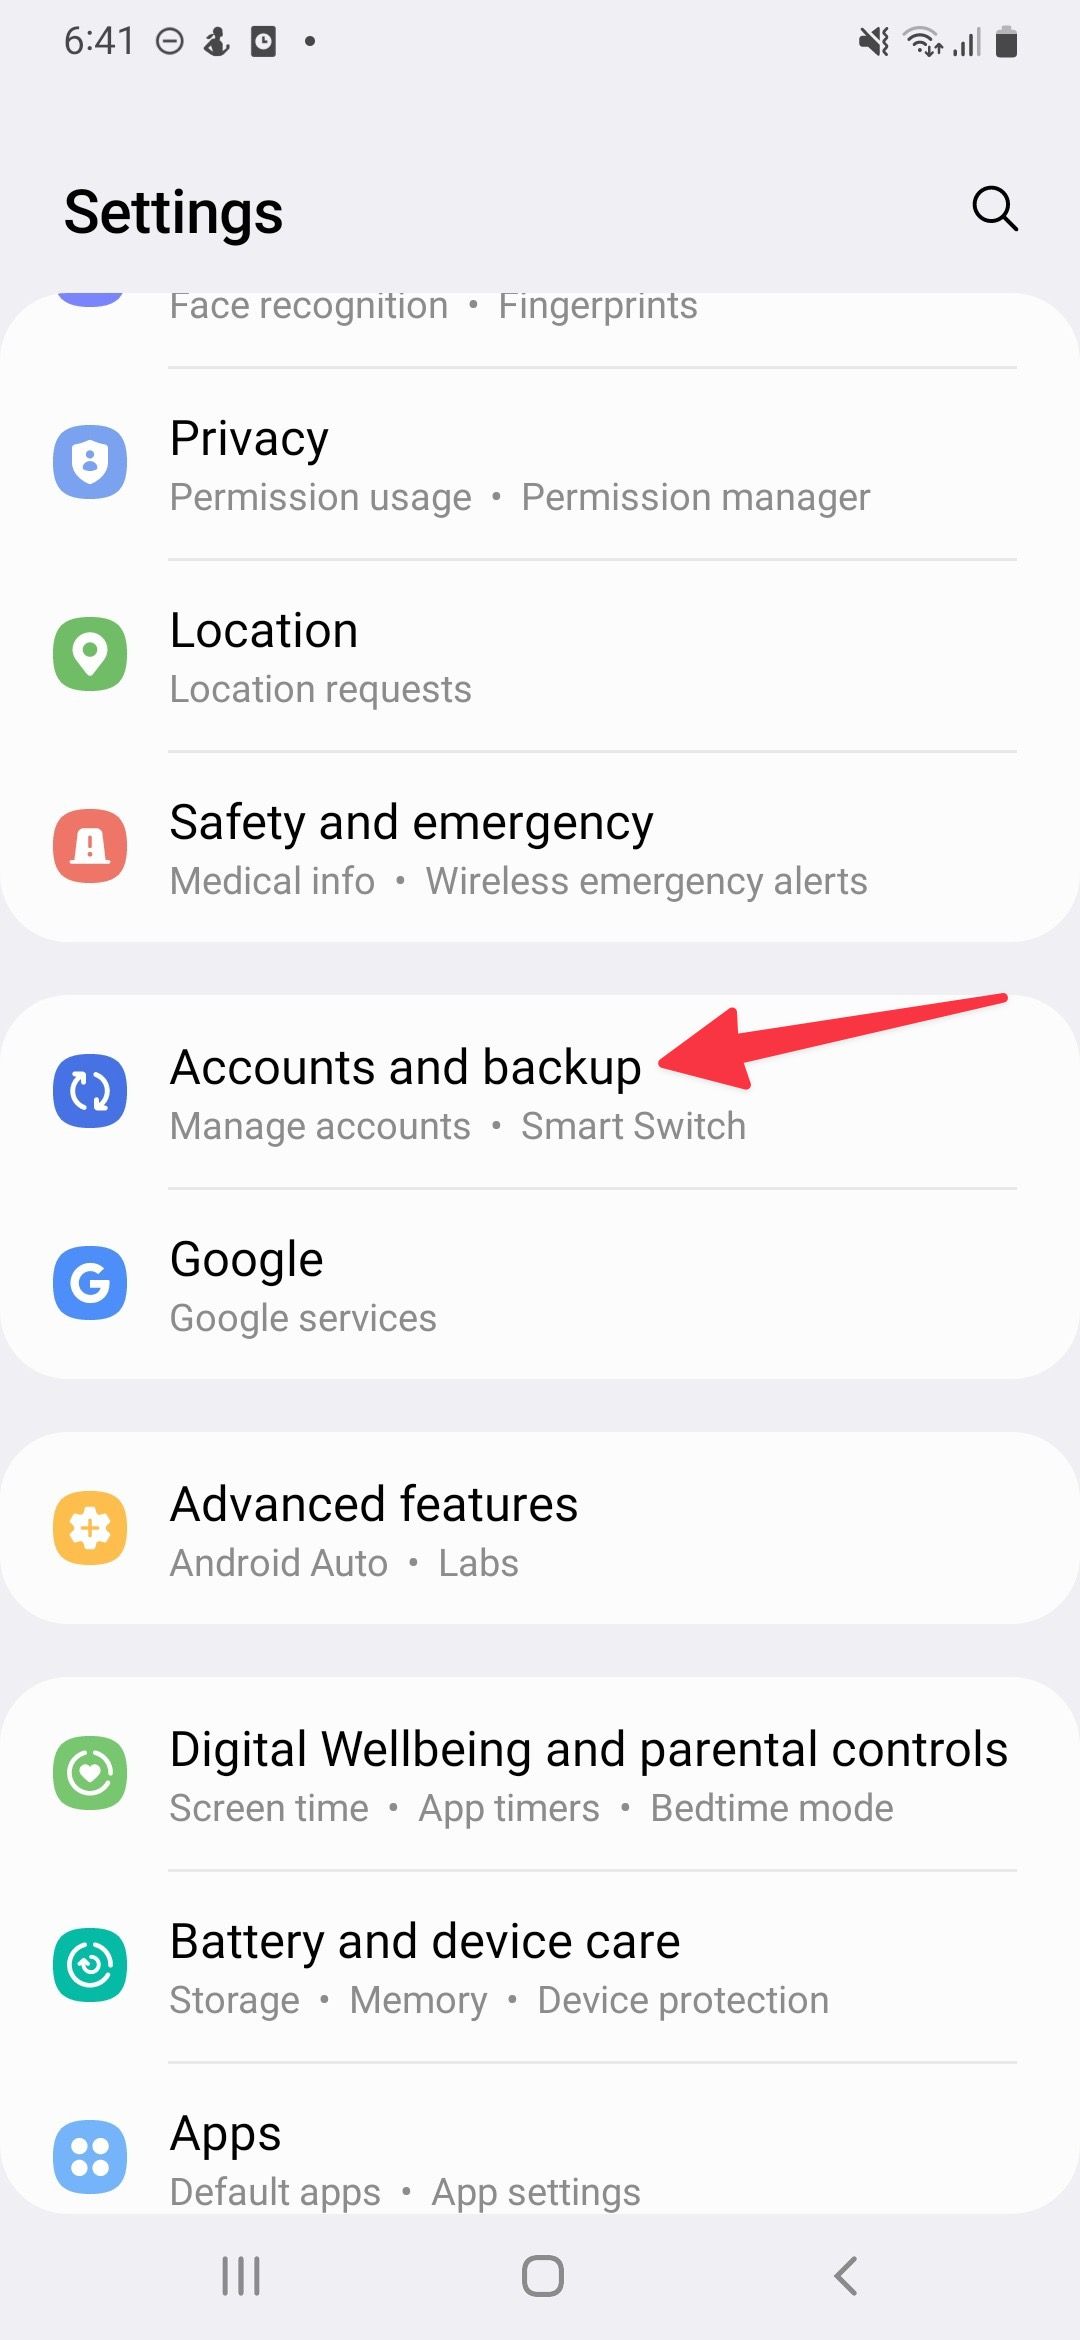 Open Accounts and backup on your Samsung device